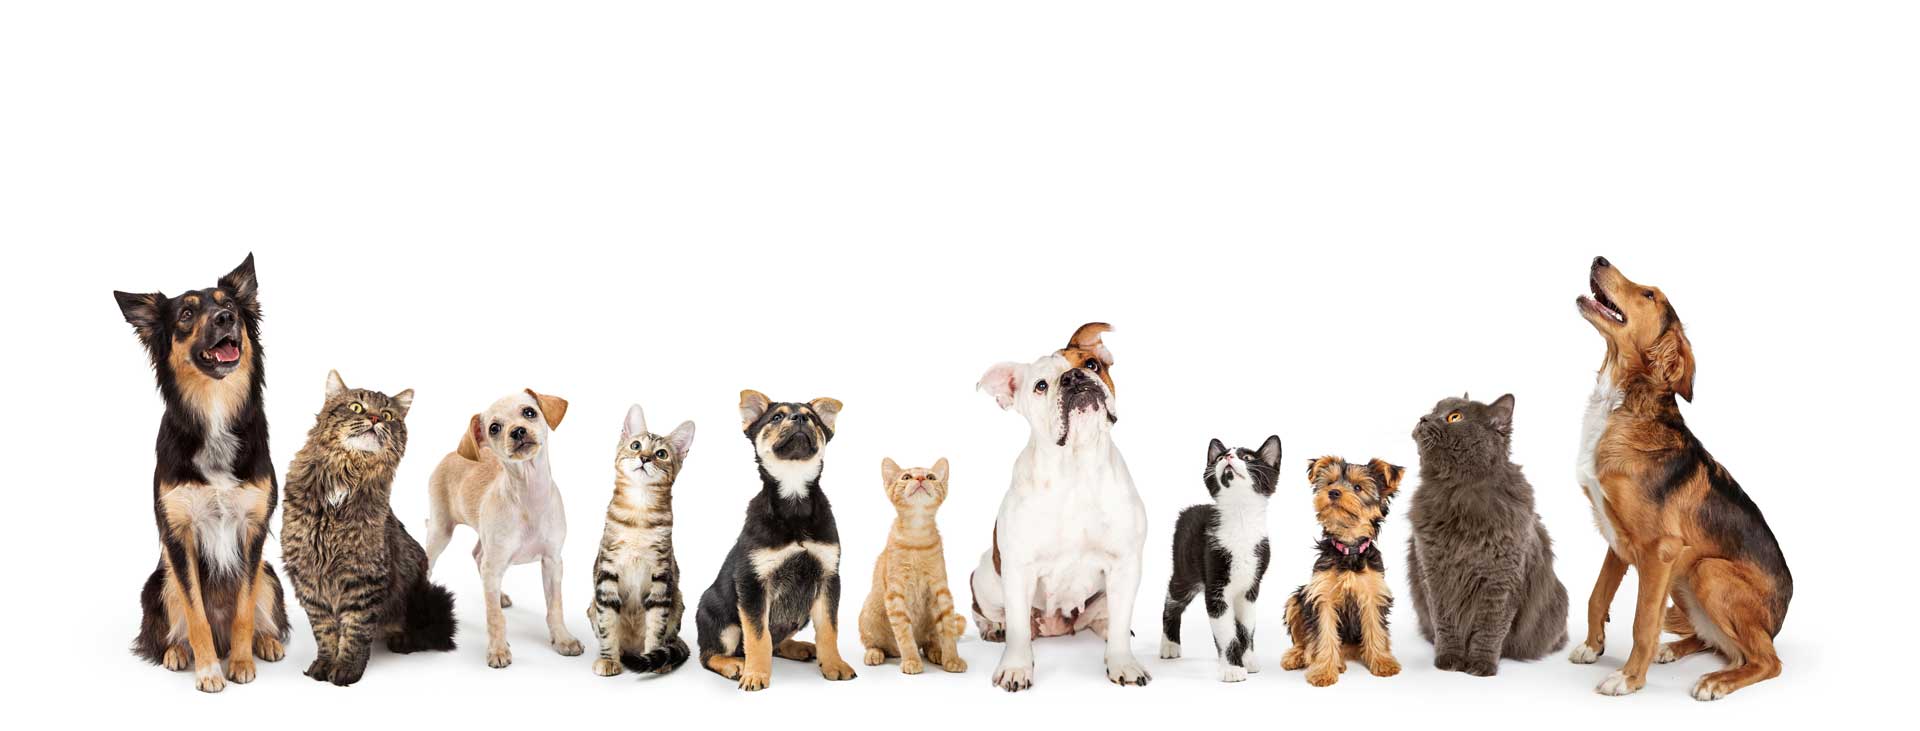 A line-up of various dogs and cats